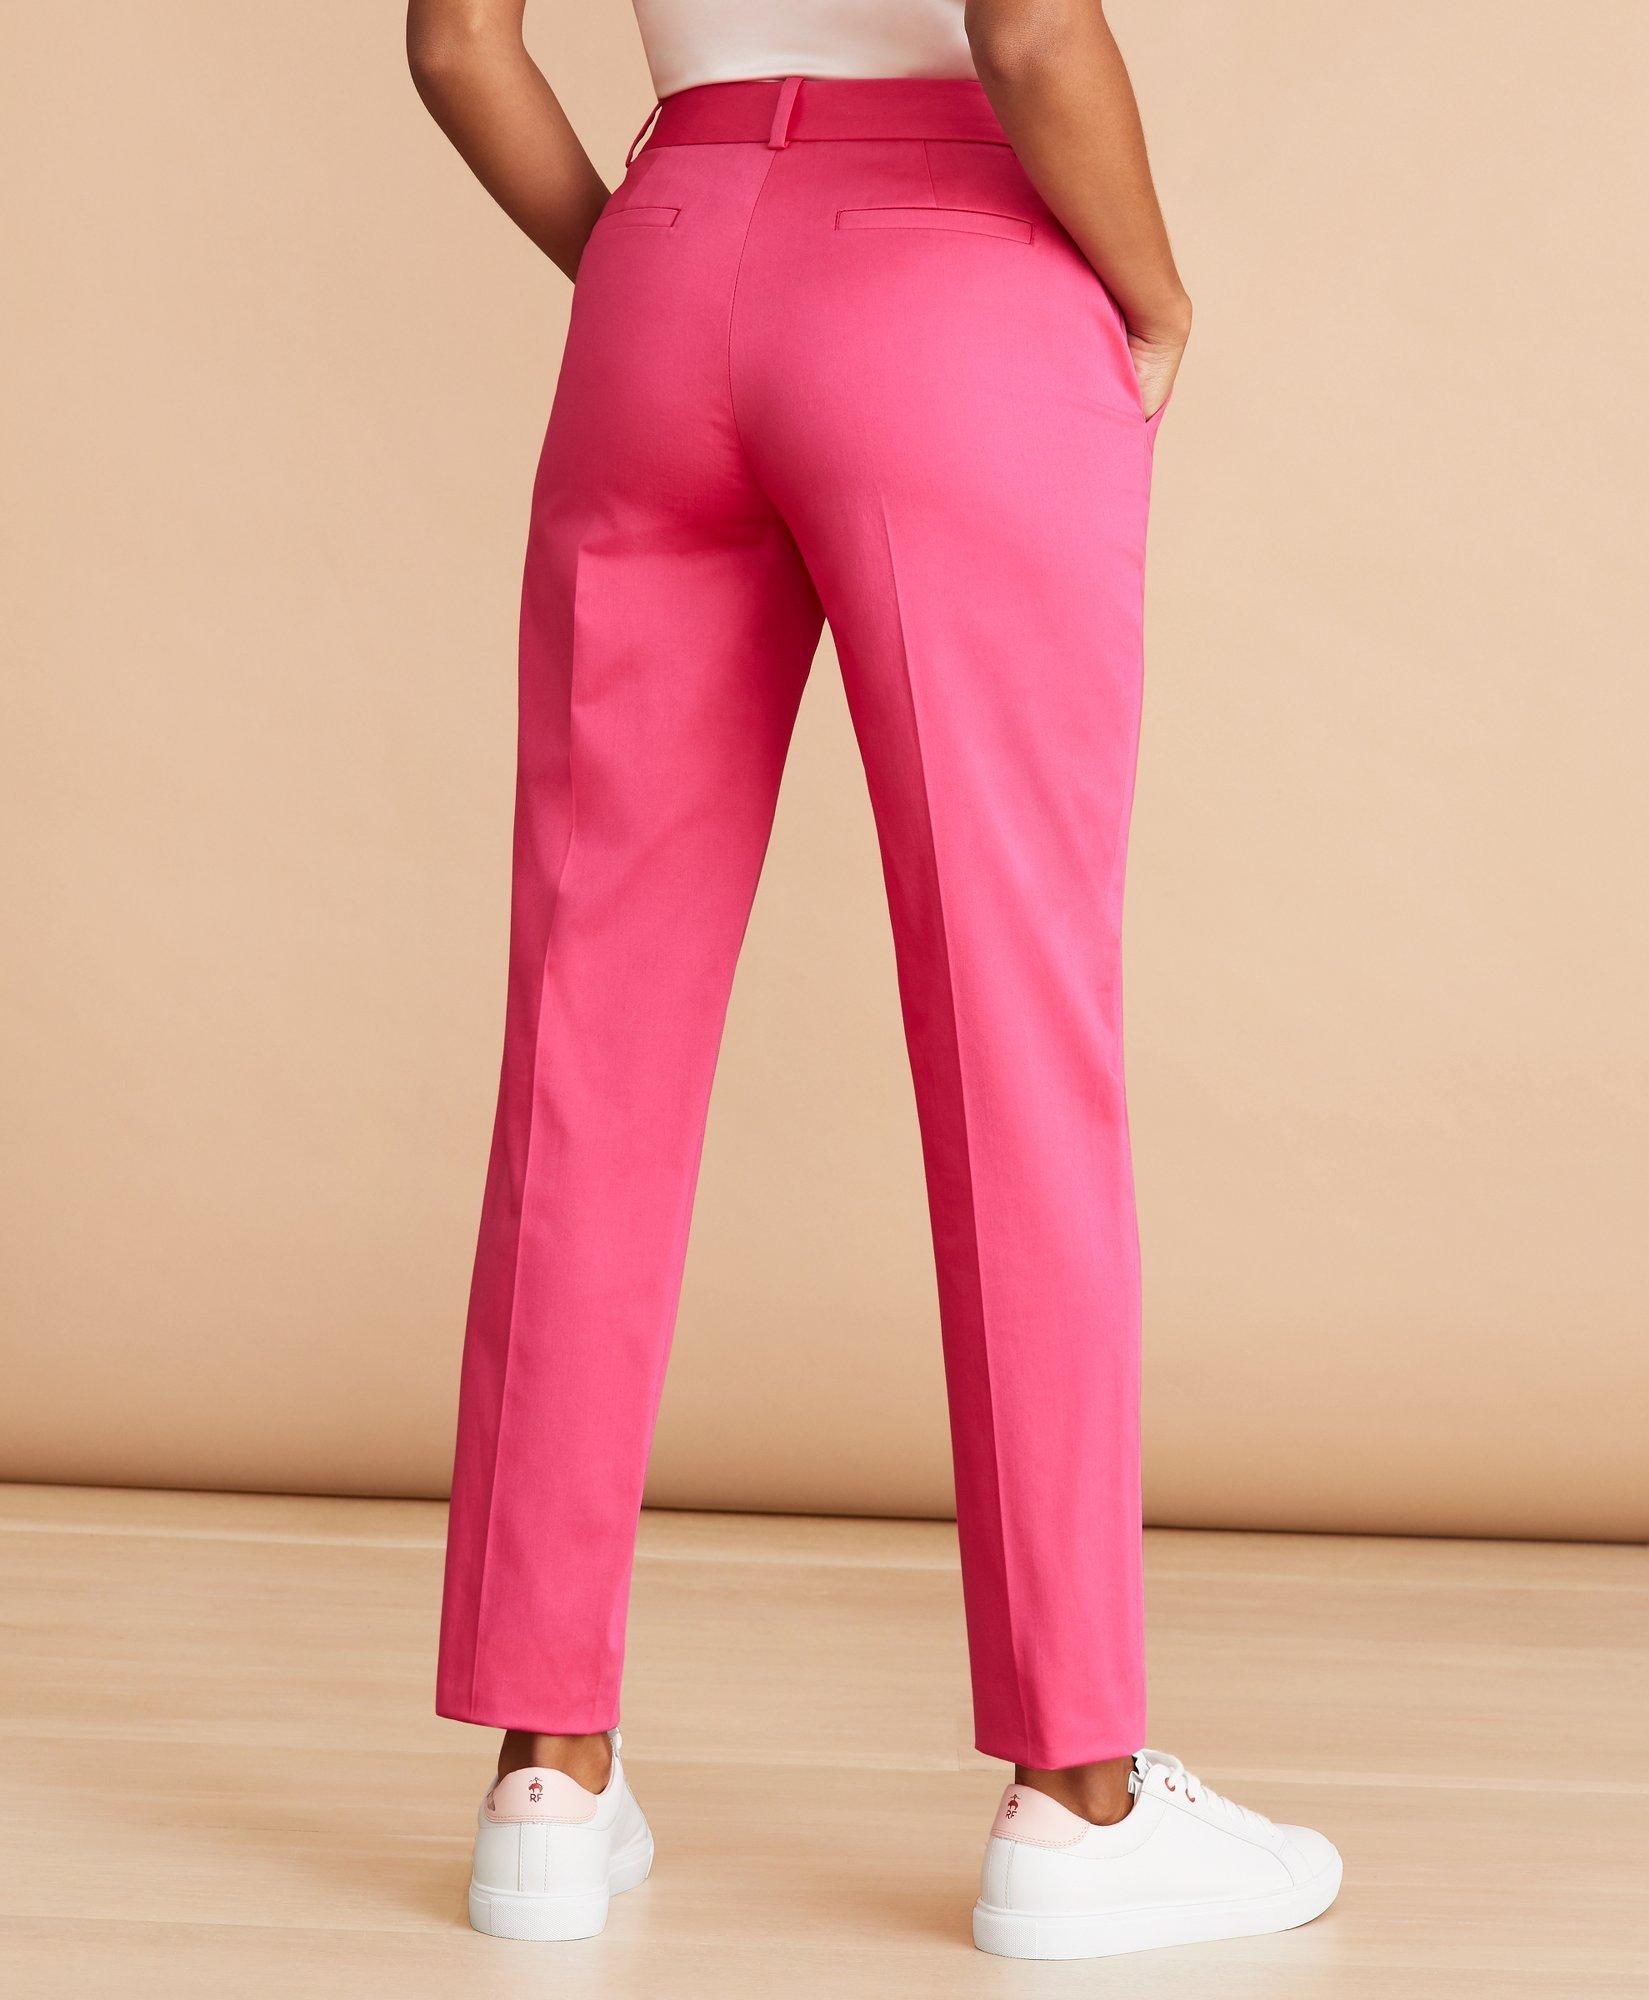 UP! Women's Cotton Stretch Sateen Pant